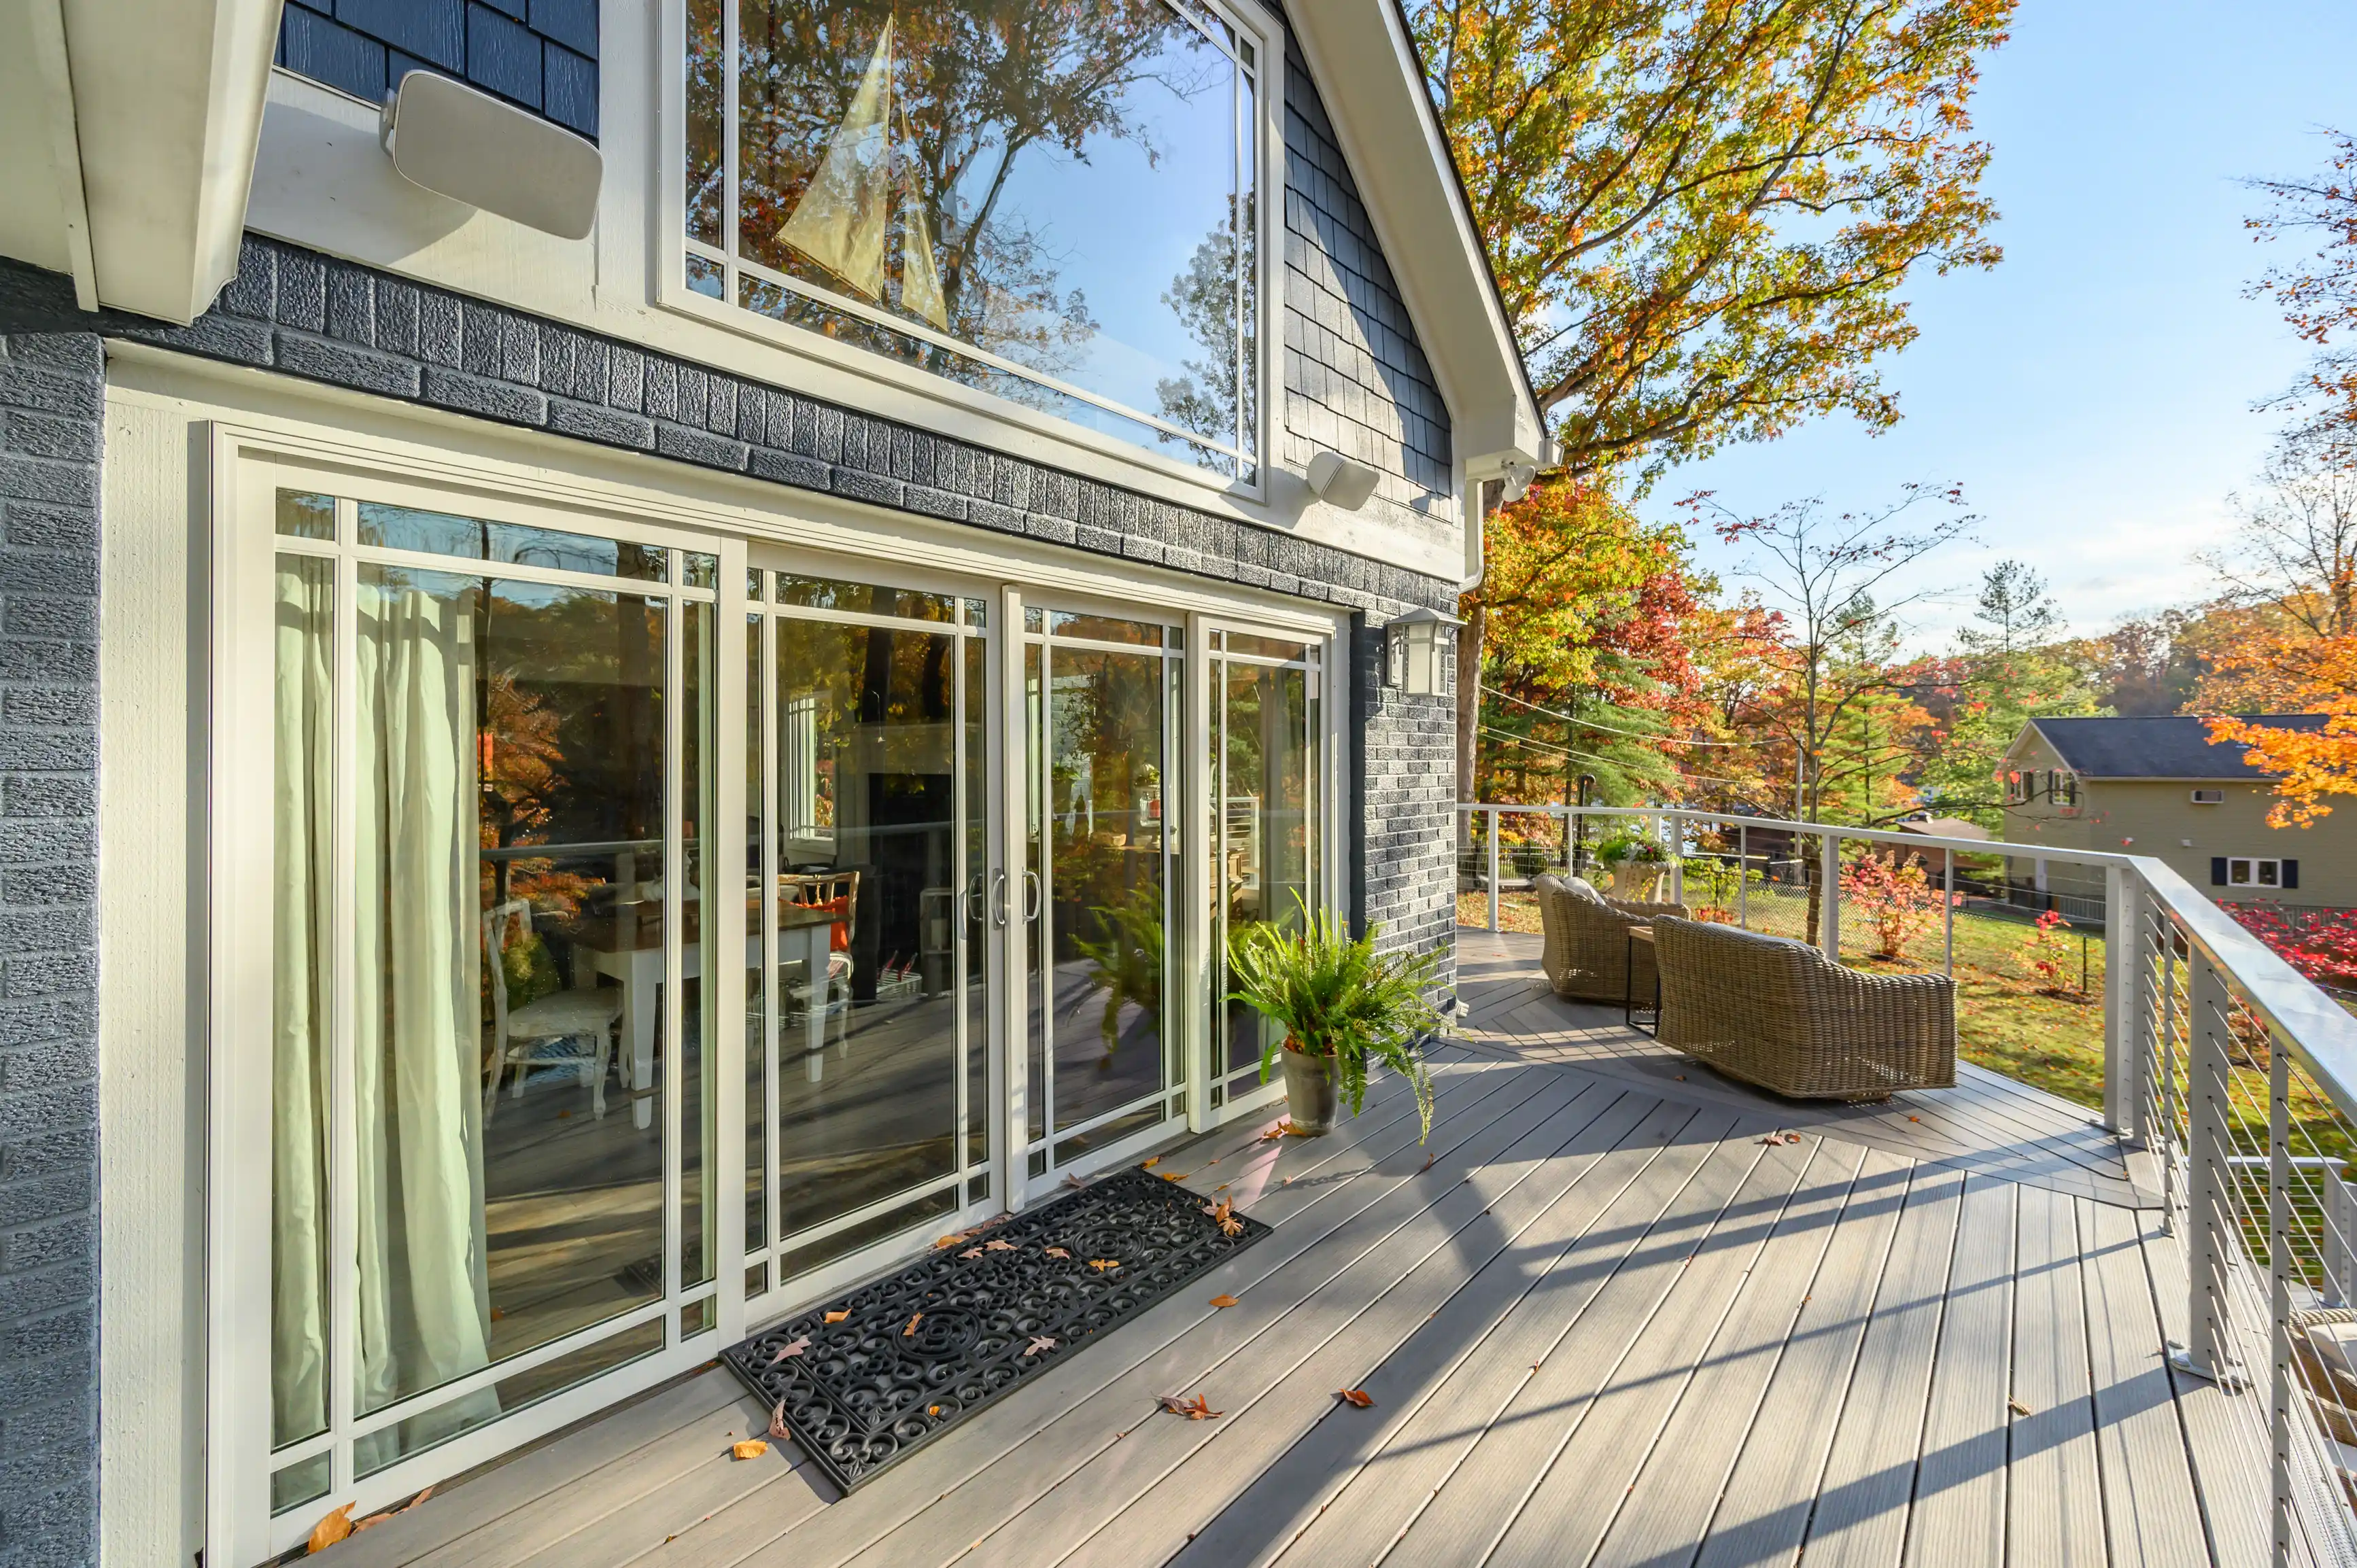 Modern house exterior with a spacious deck featuring sliding glass doors, wicker chairs, and autumn foliage in the background.